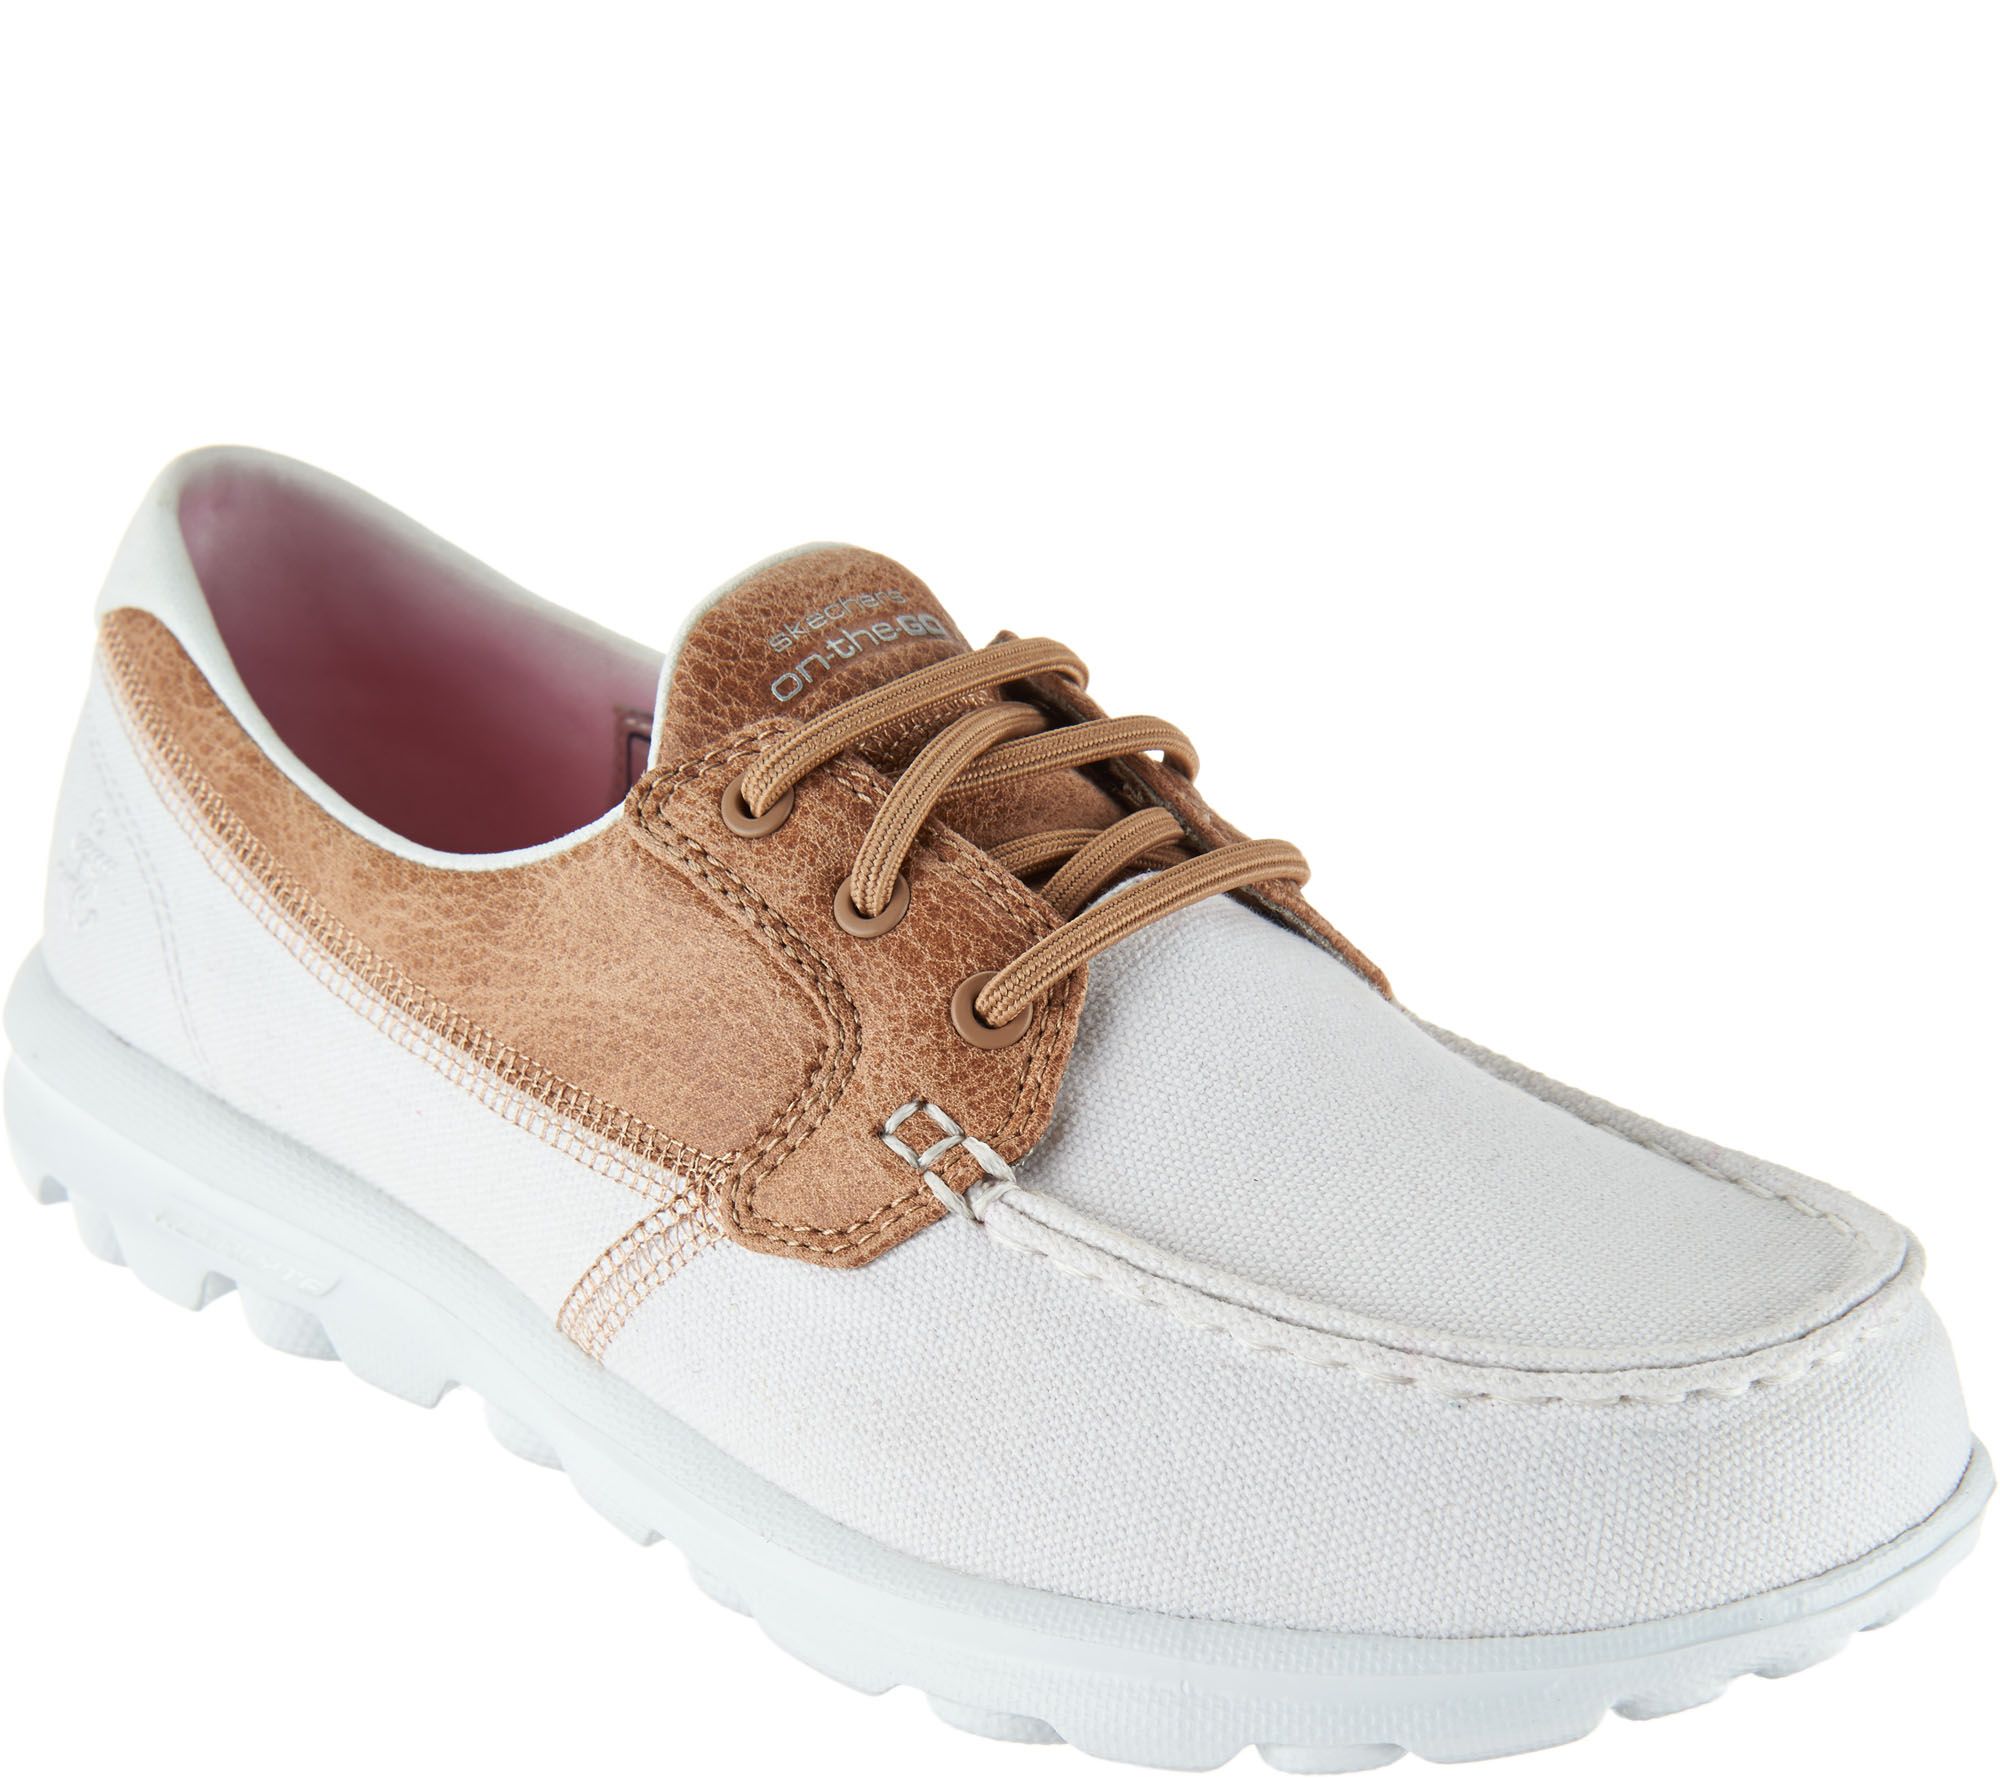 skechers on the go boat shoes